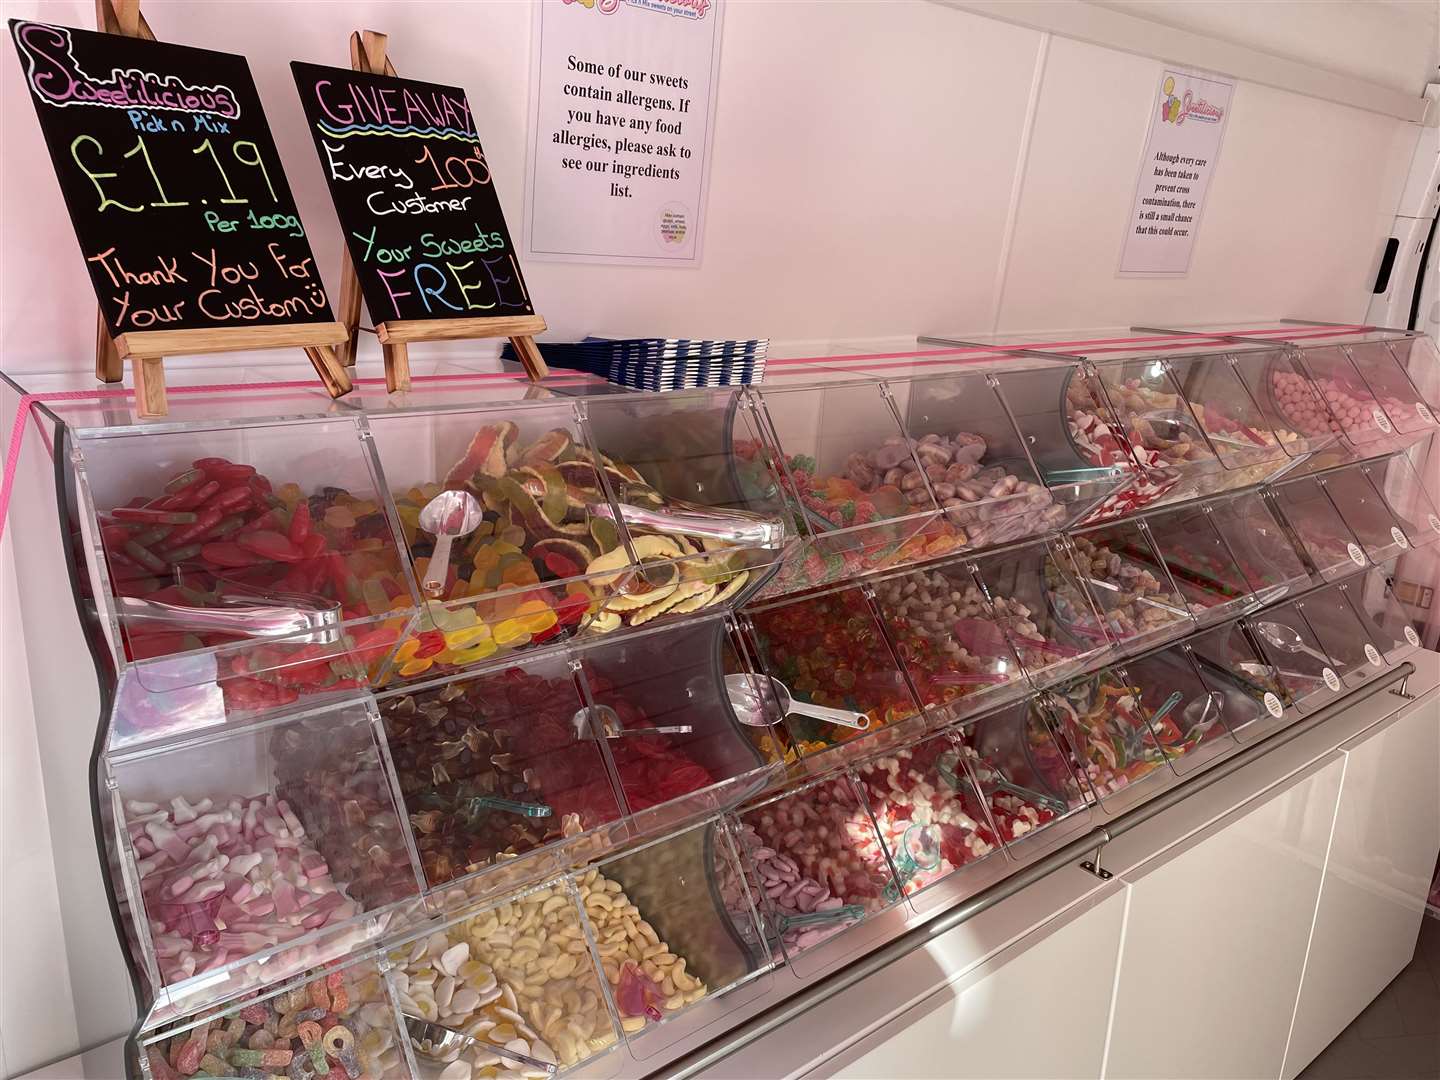 There are more than 30 varieties of classic pick 'n' mix sweets on board